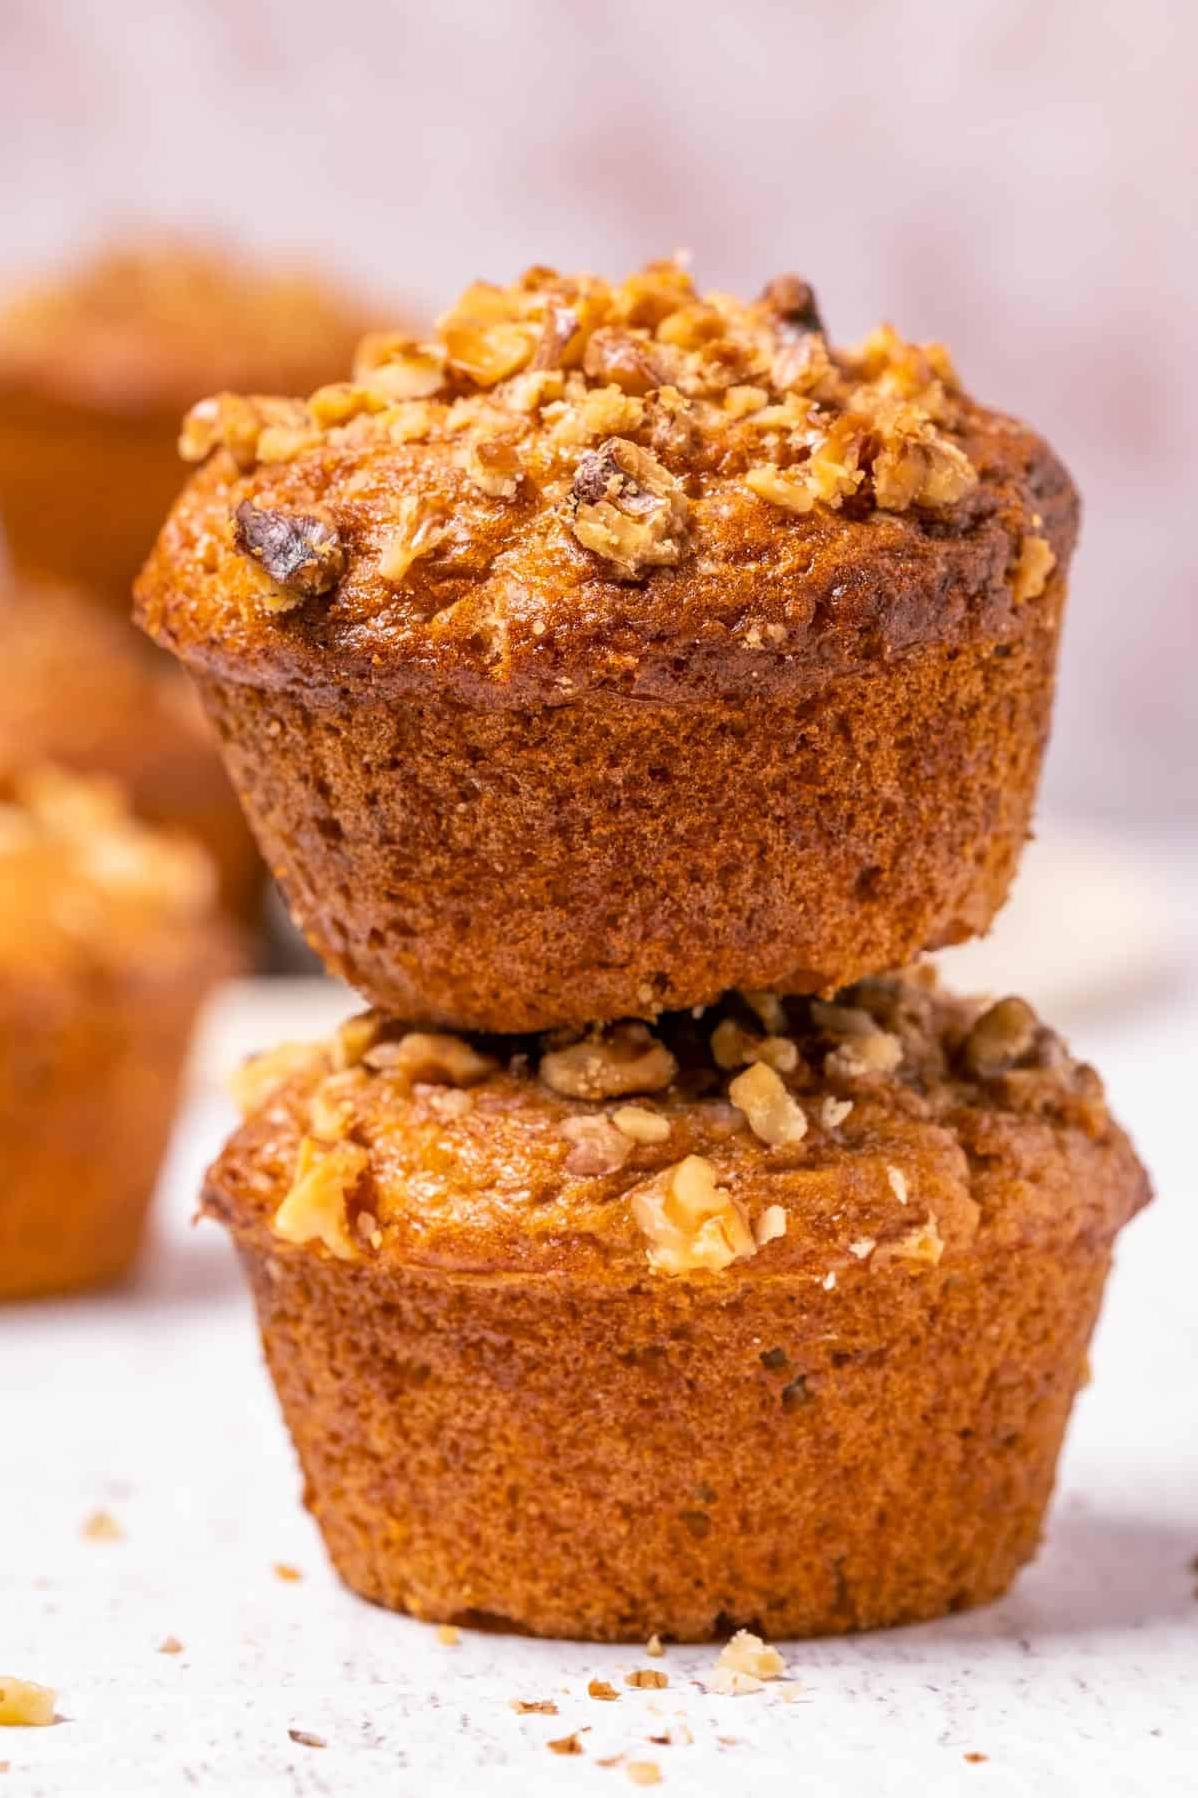  Let your oven do the work while you enjoy the sweet aroma of freshly baked banana bread muffins.